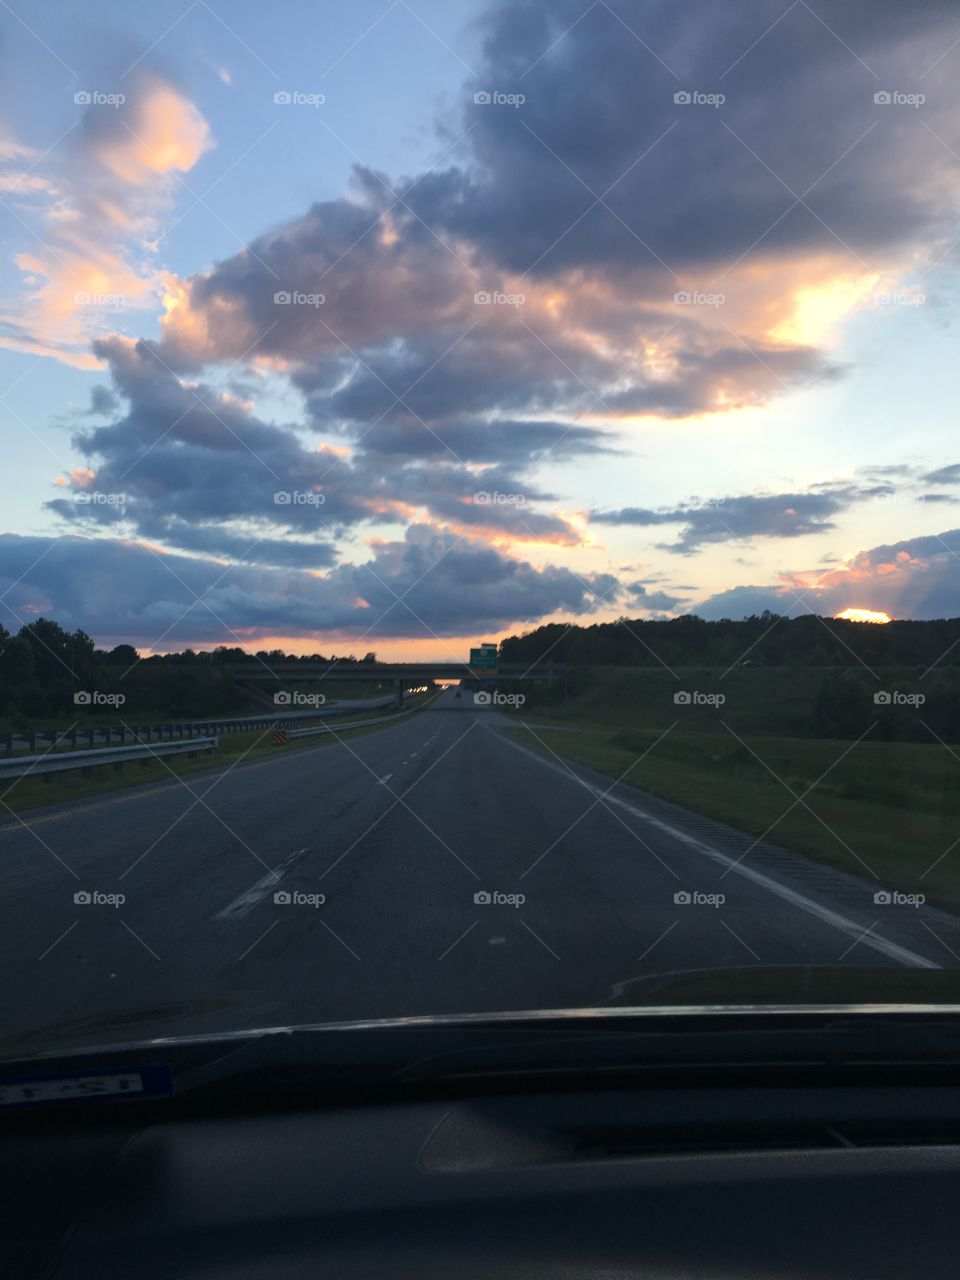 Driving down the road at sunset in North Carolina